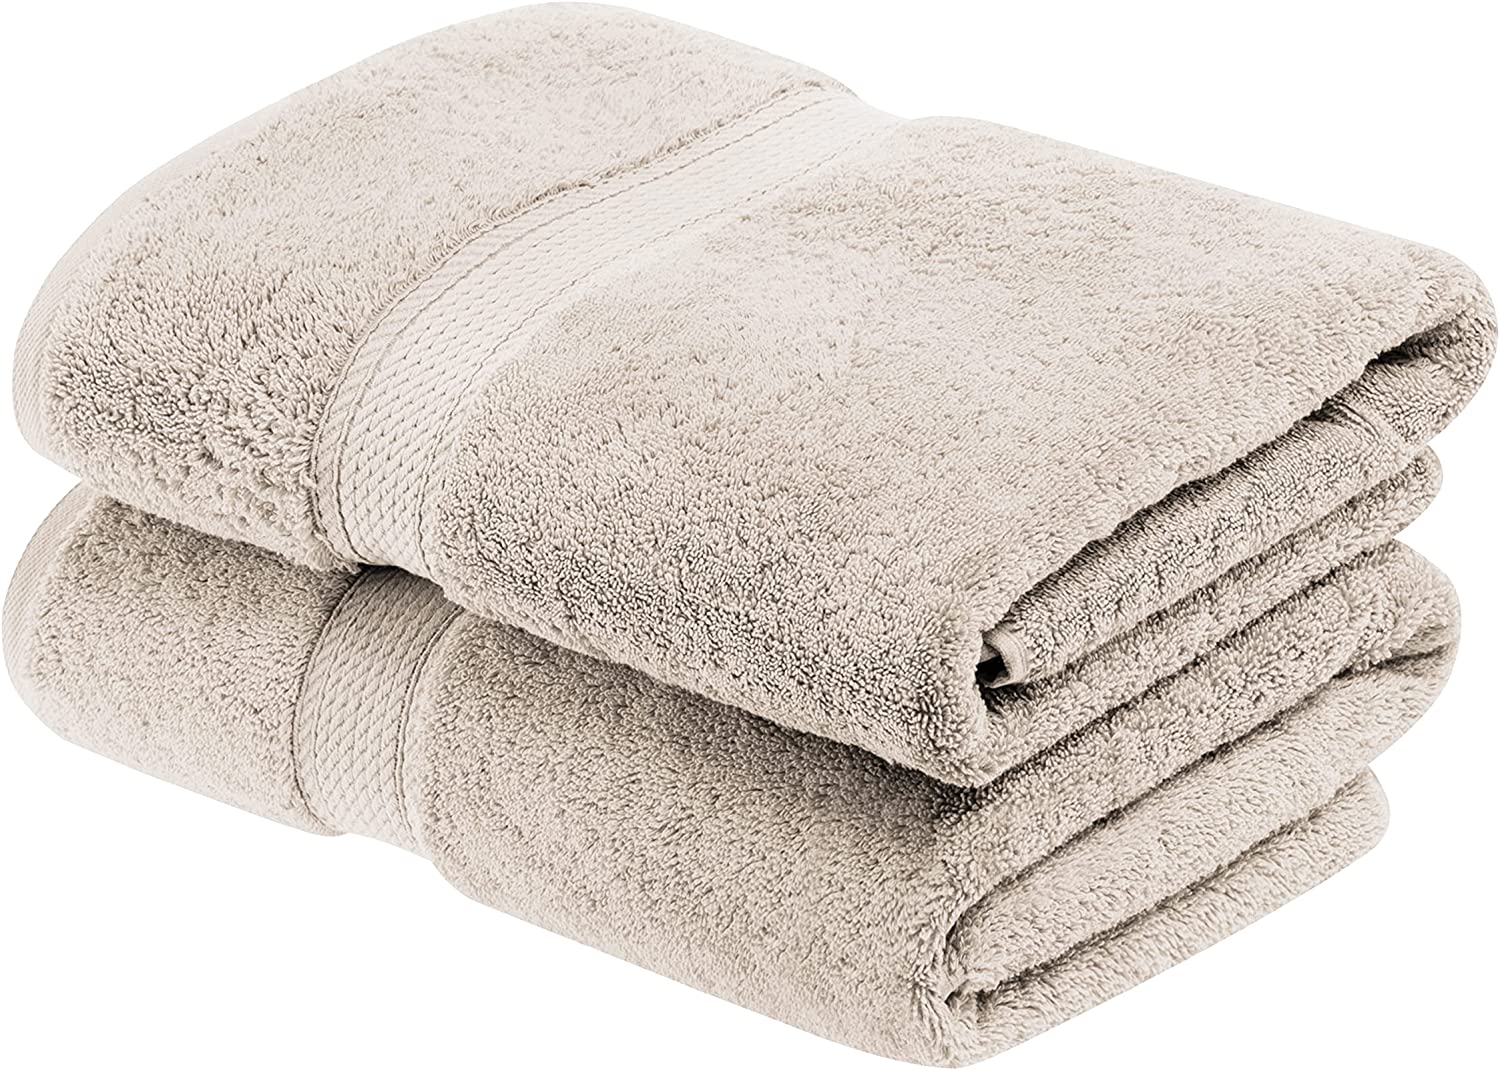 SUPERIOR Egyptian Cotton Bath Sheet Towels, Luxury, Large, Soft, Extra Absorbent, Quick Dry Towel Set for Body, Shower, Bathroom, Home Essentials, Decor, Pool, Spa, 2 Pieces, Stone